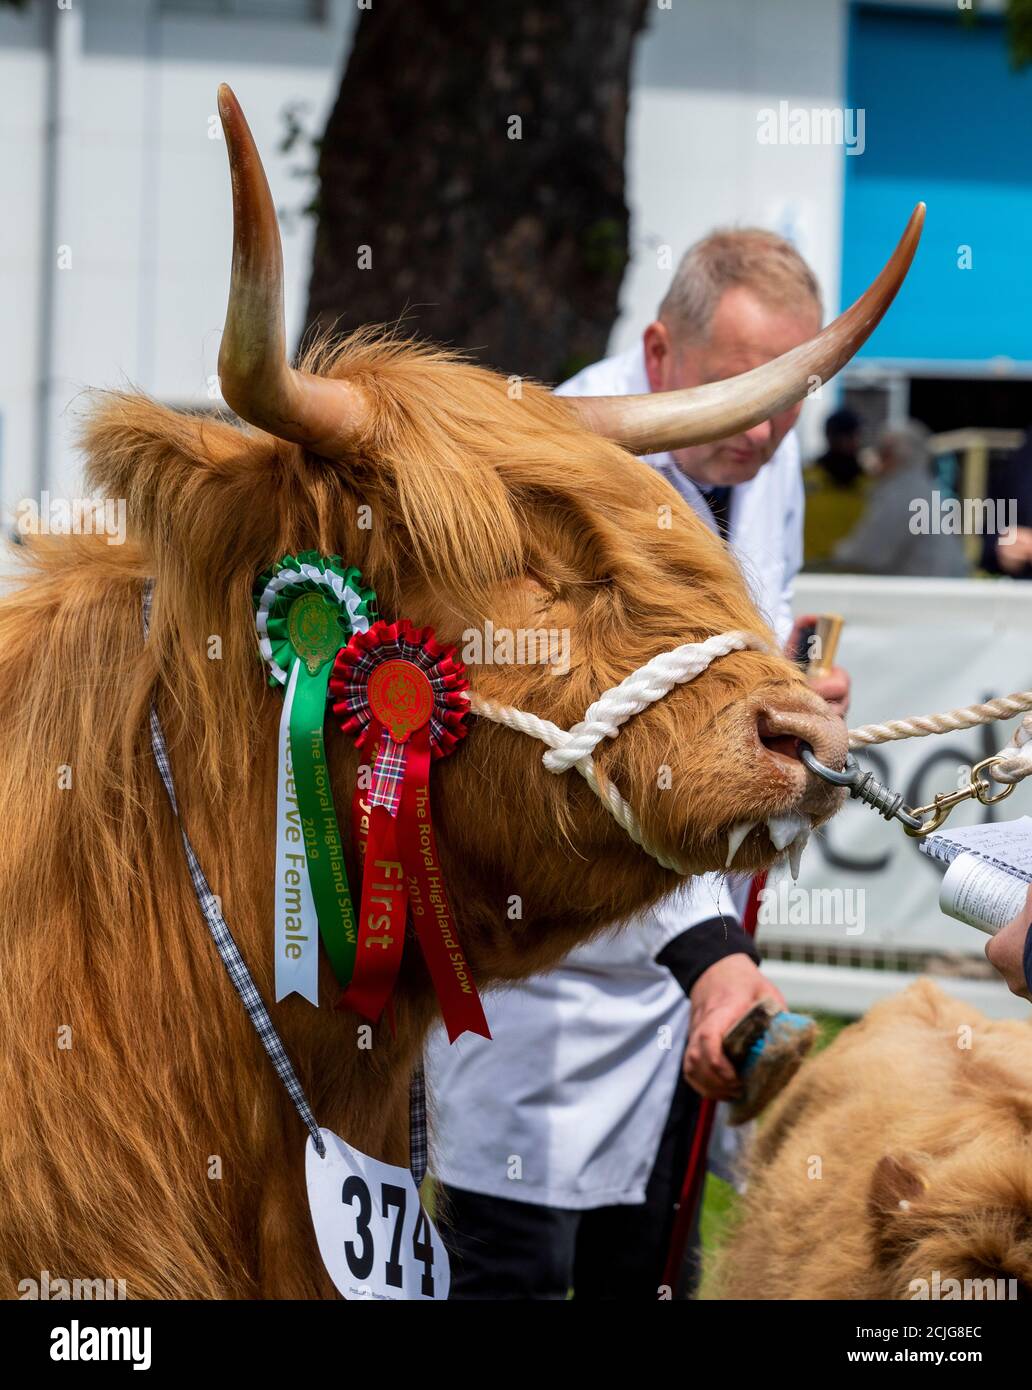 Highland Cow and Calf at Show Stock Photo